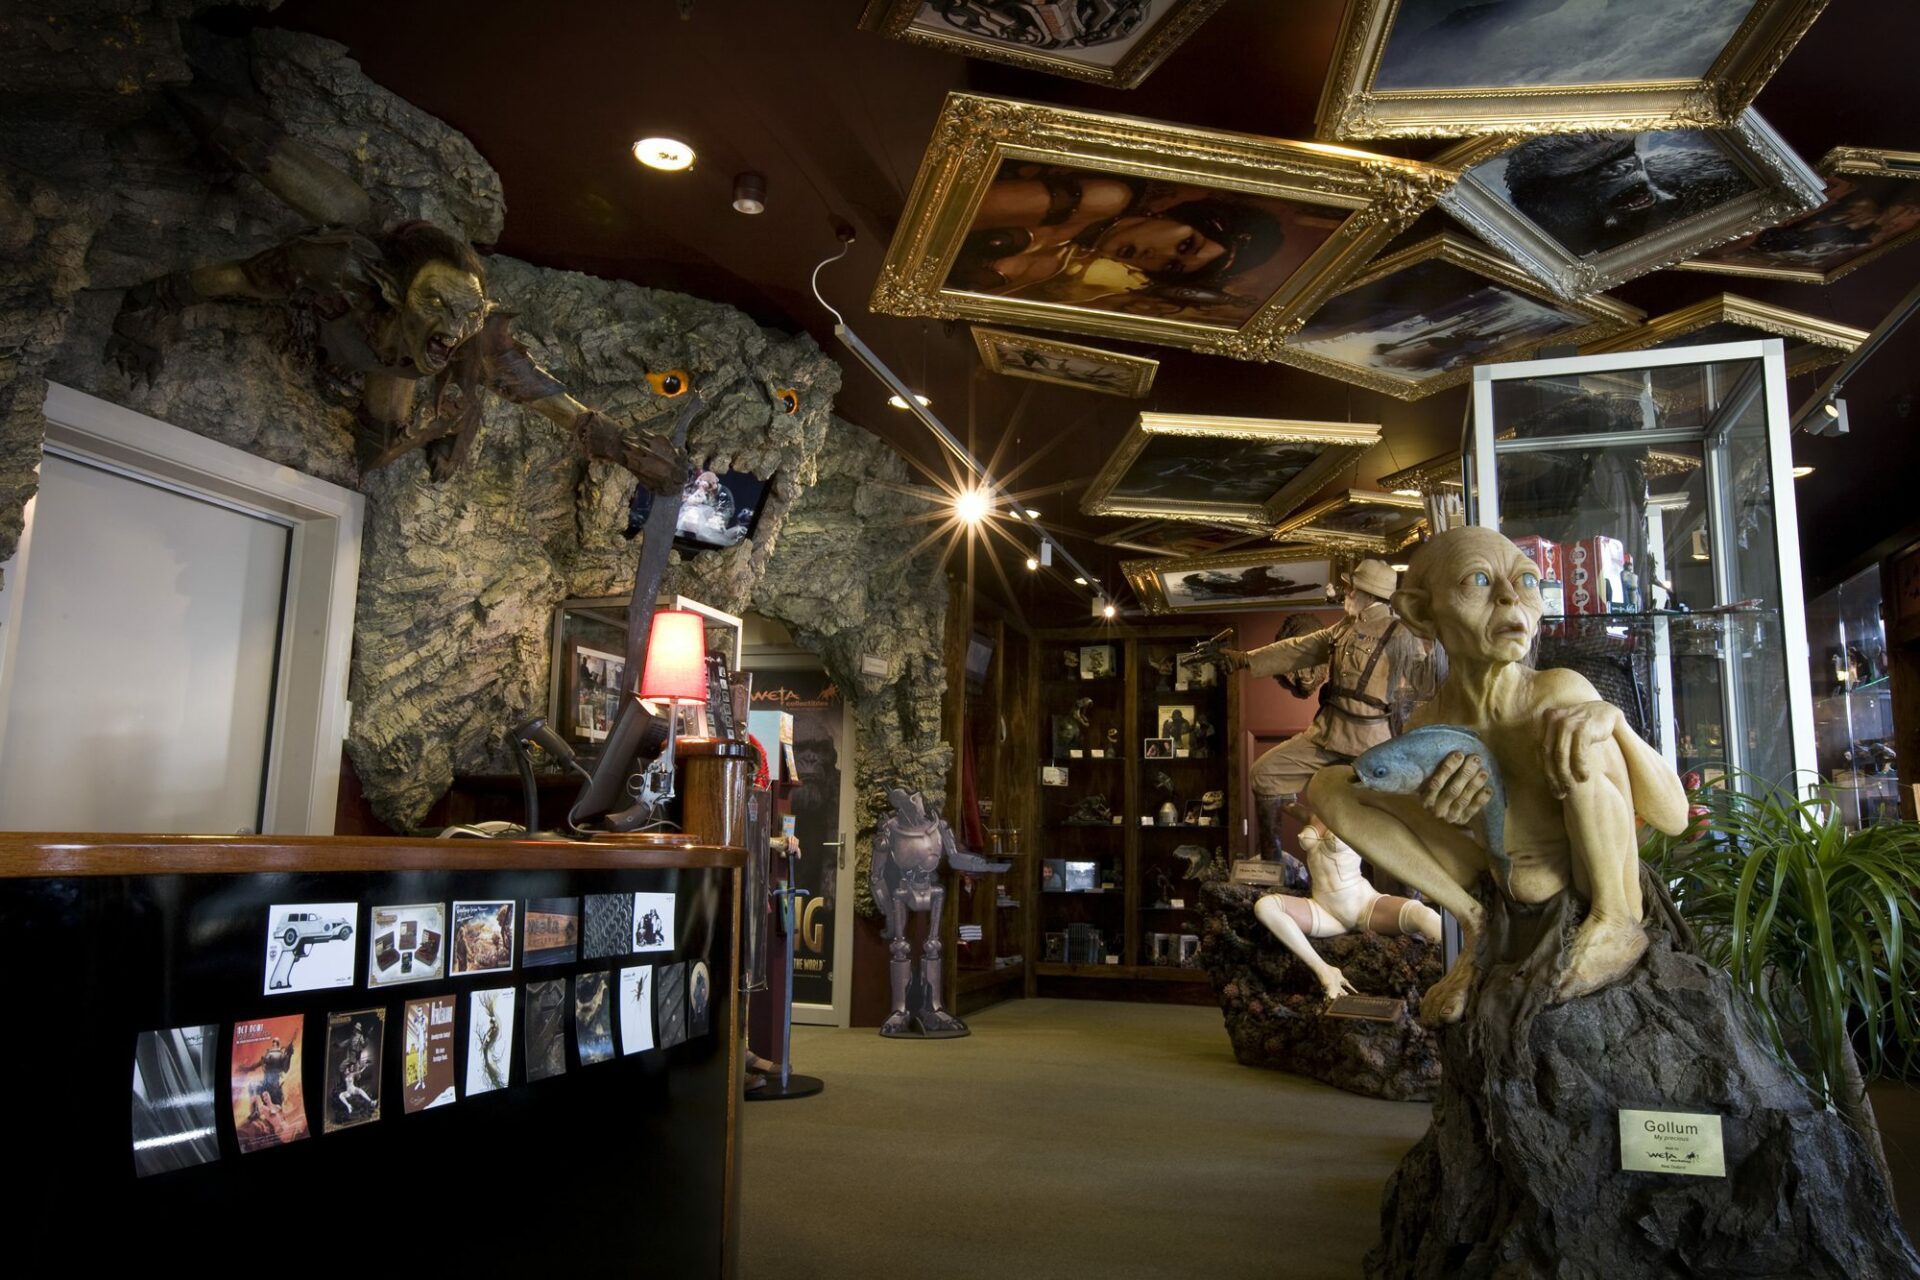 Inside the whacky Weta Cave Museum with picture frames on the ceiling.